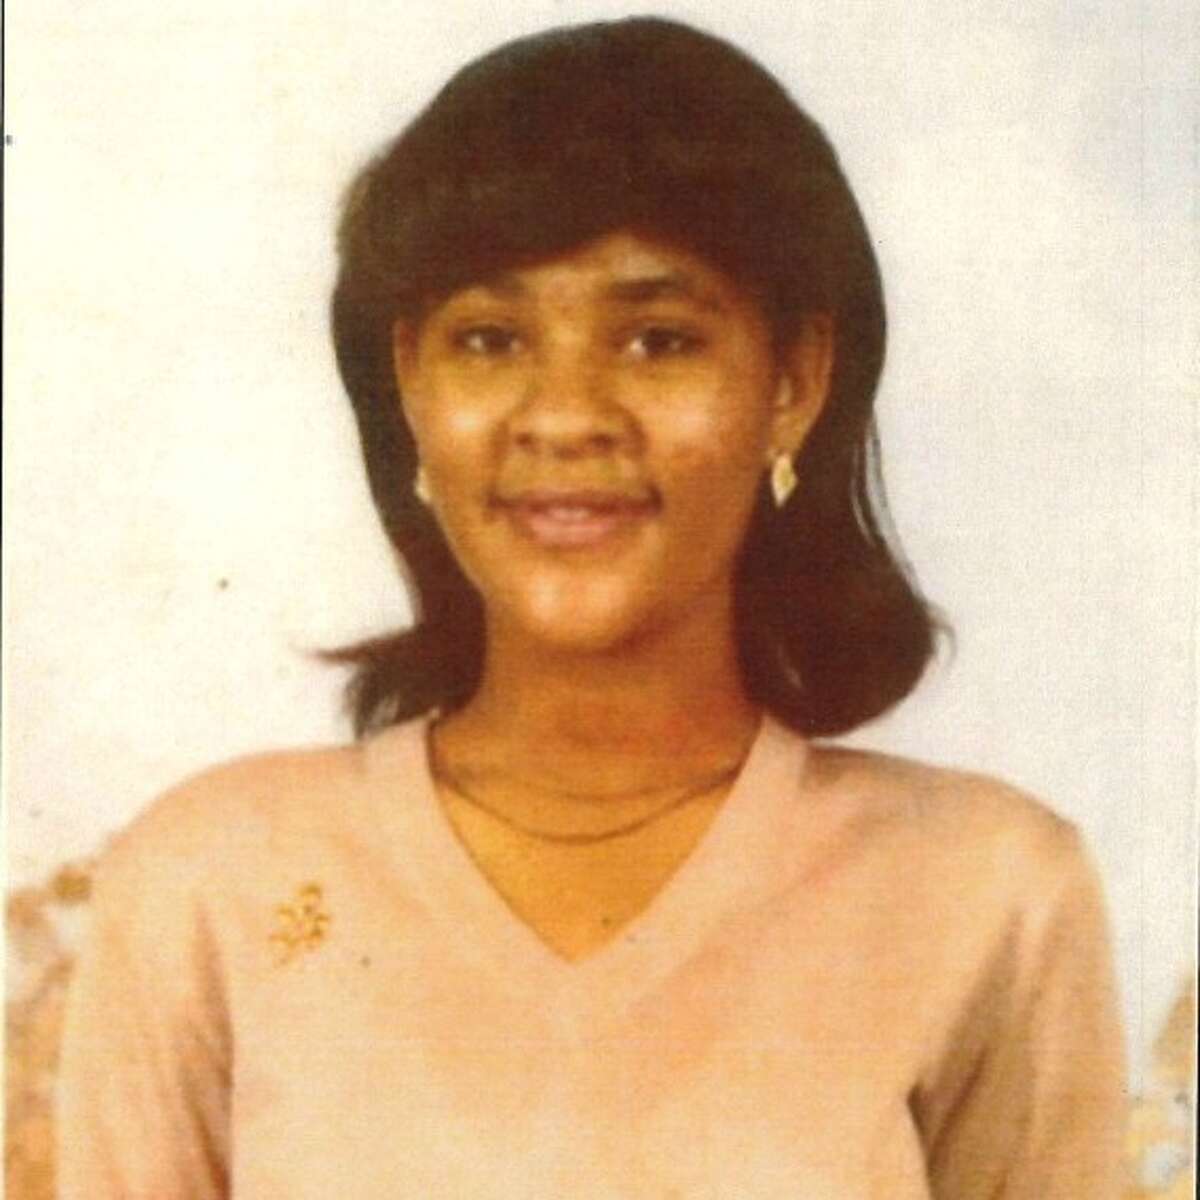 Alisha "Lisa" Marie Cooks, a Houston teenager reported missing at age 16 in 1985.